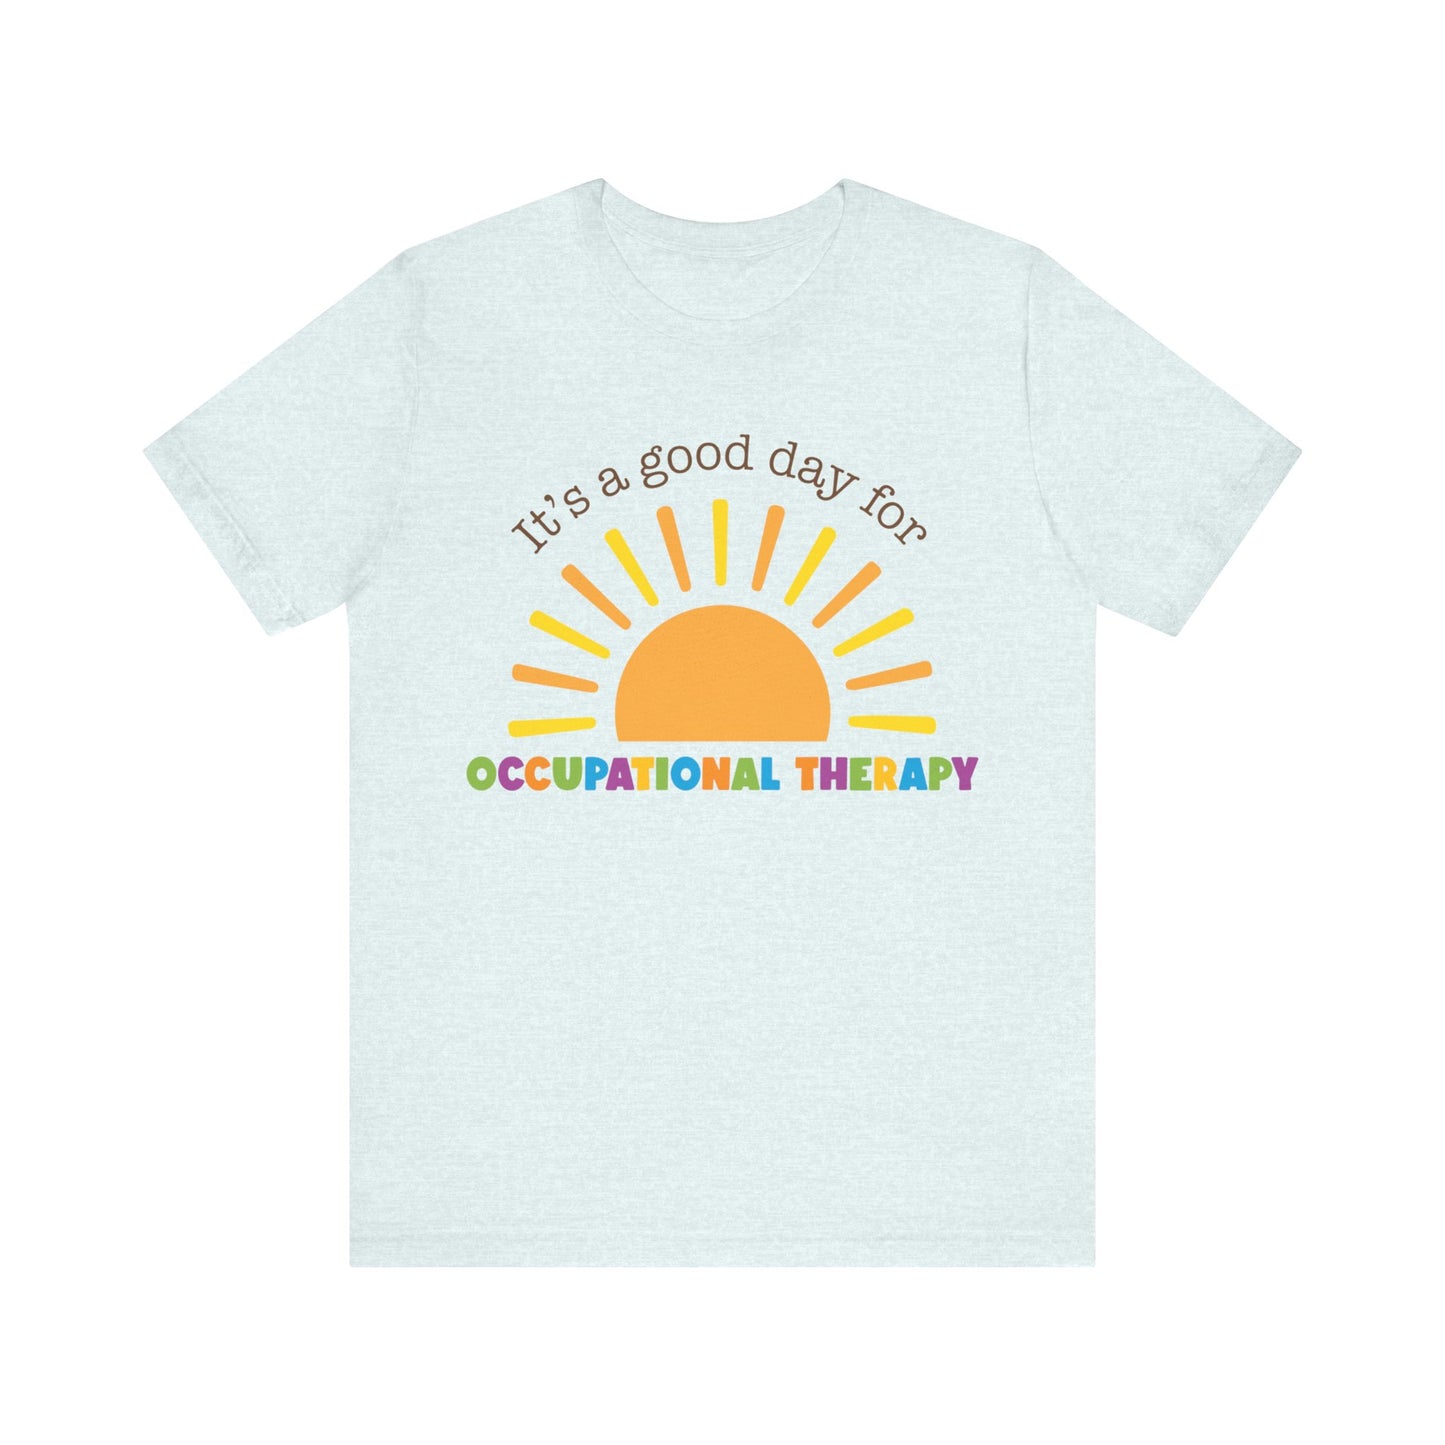 It's A Good Day For Occupational Therapy Shirt, OT Shirt, Gift for Therapist